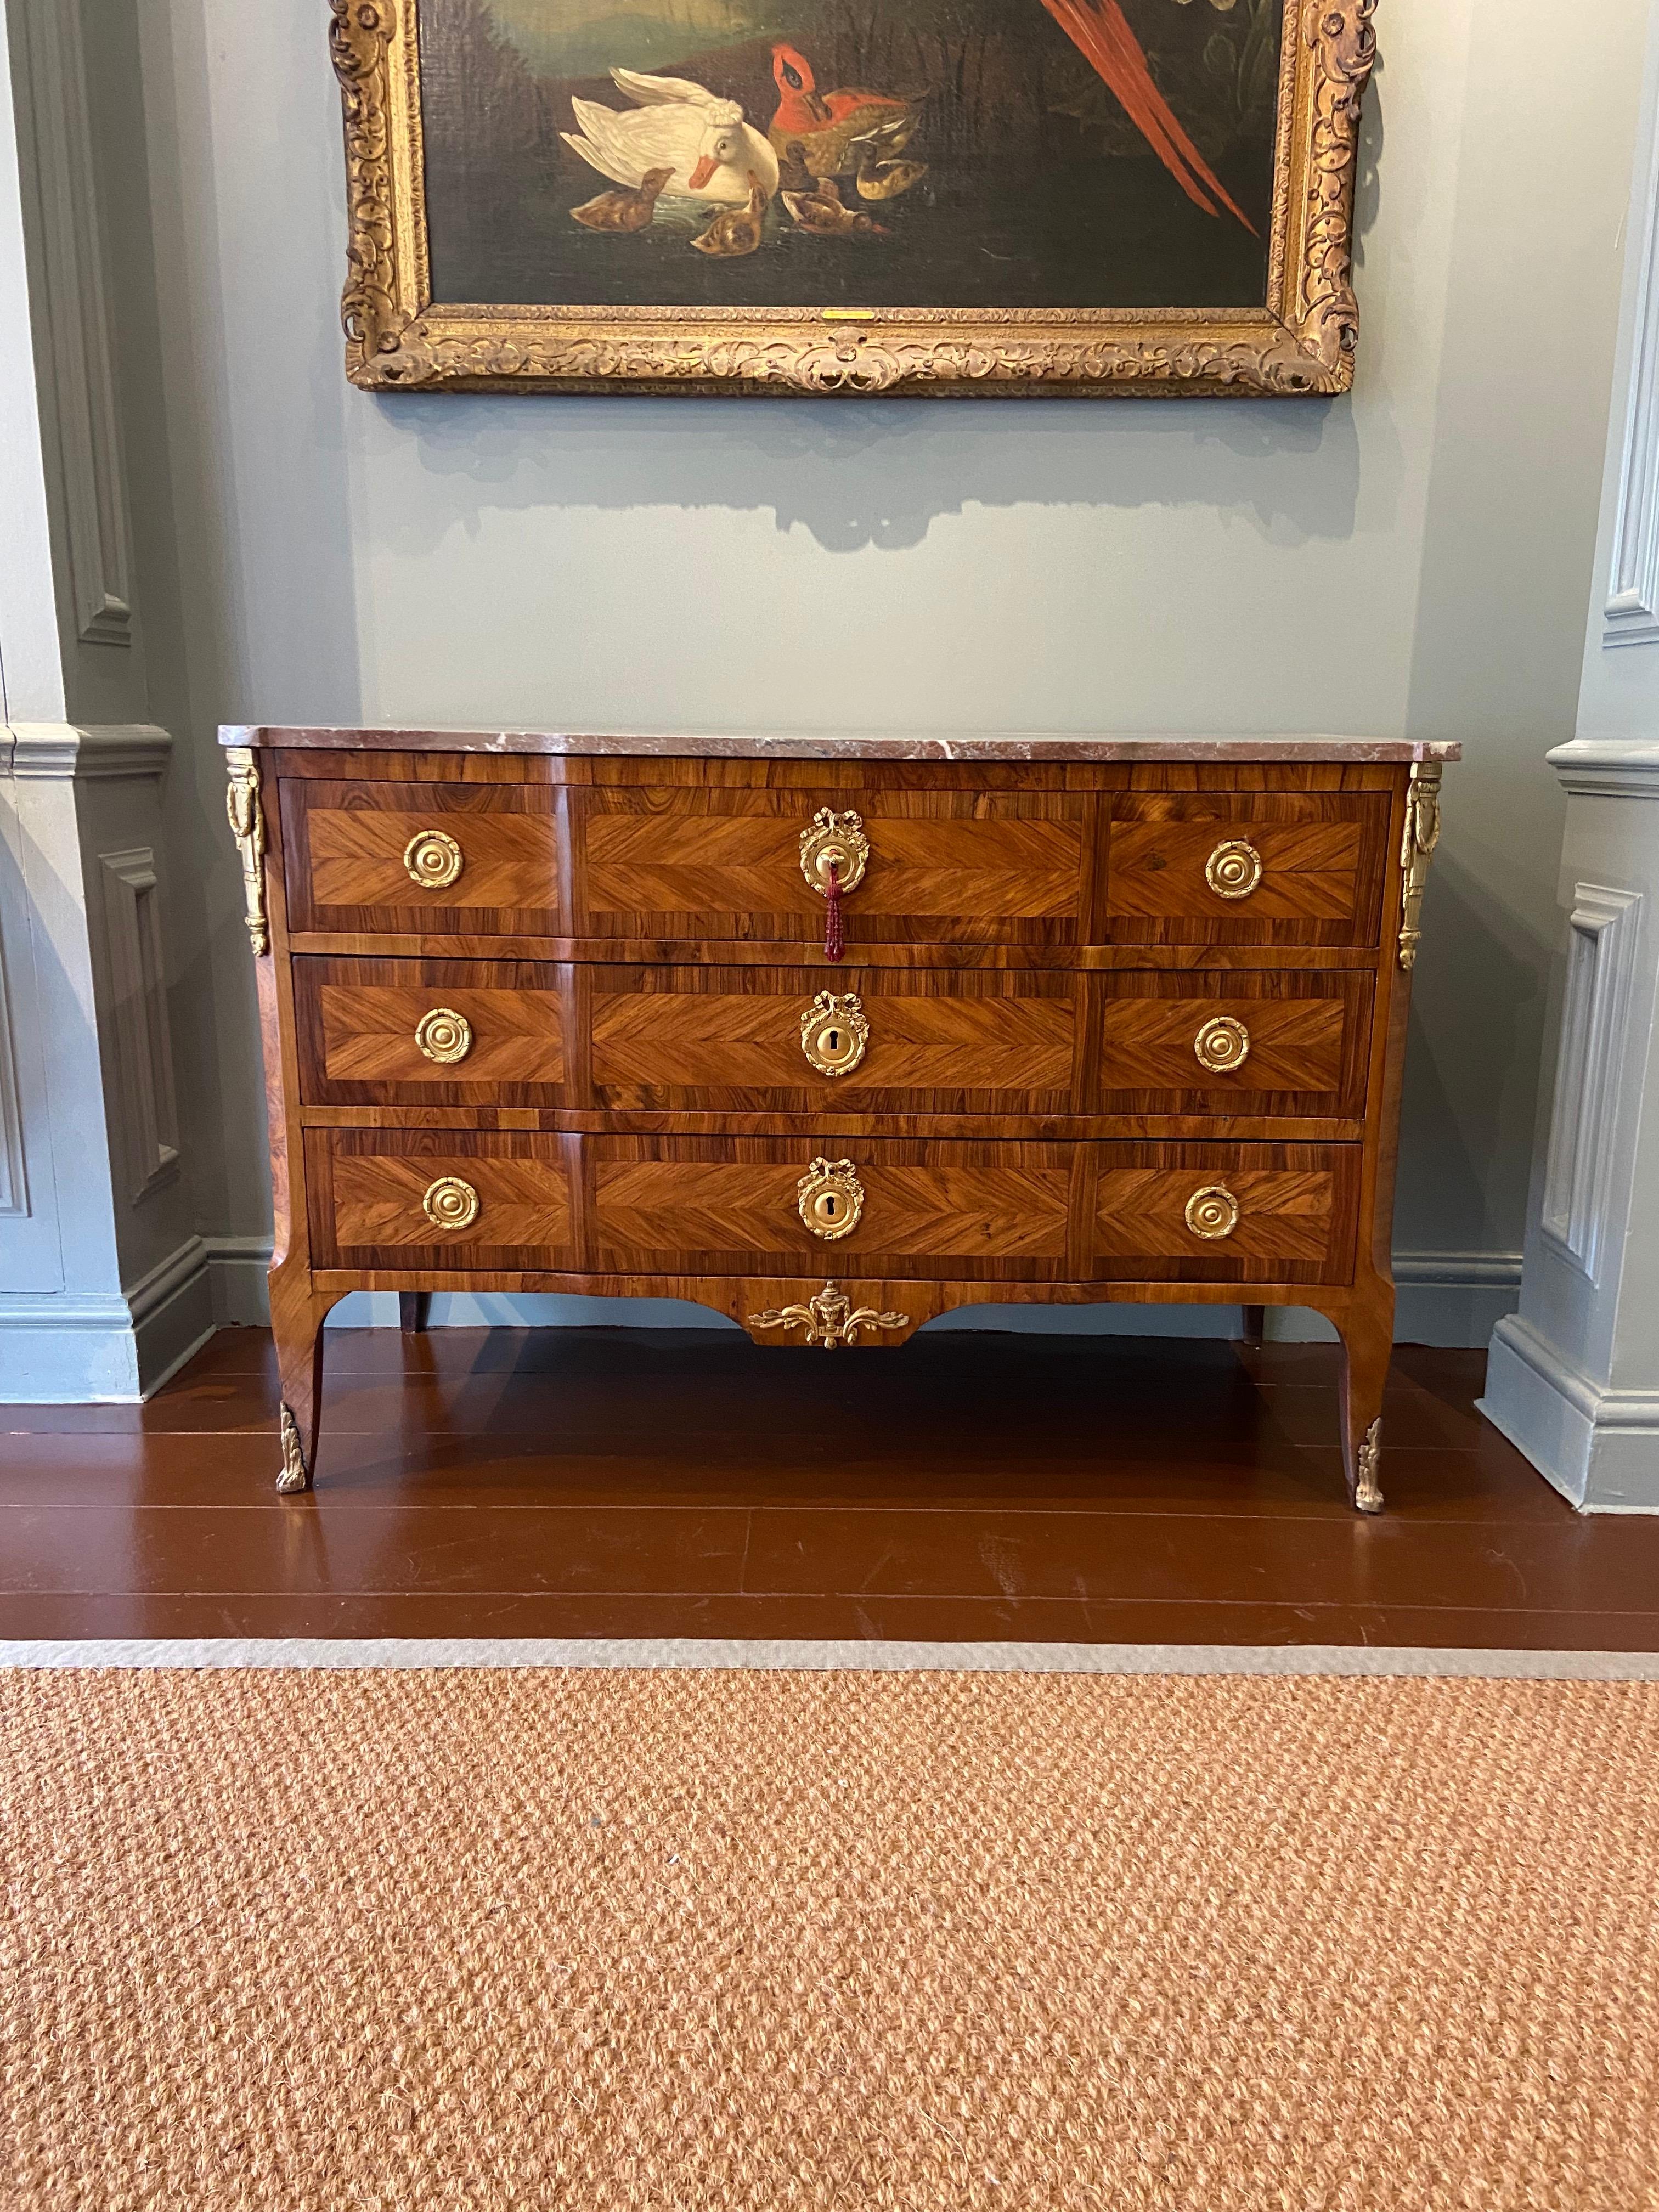 A Louis XV Ormolu-Mounted Kingwood and Fruitwood Commode (Mid 18th Century). Stamped 'P. Roussel' and 'JME